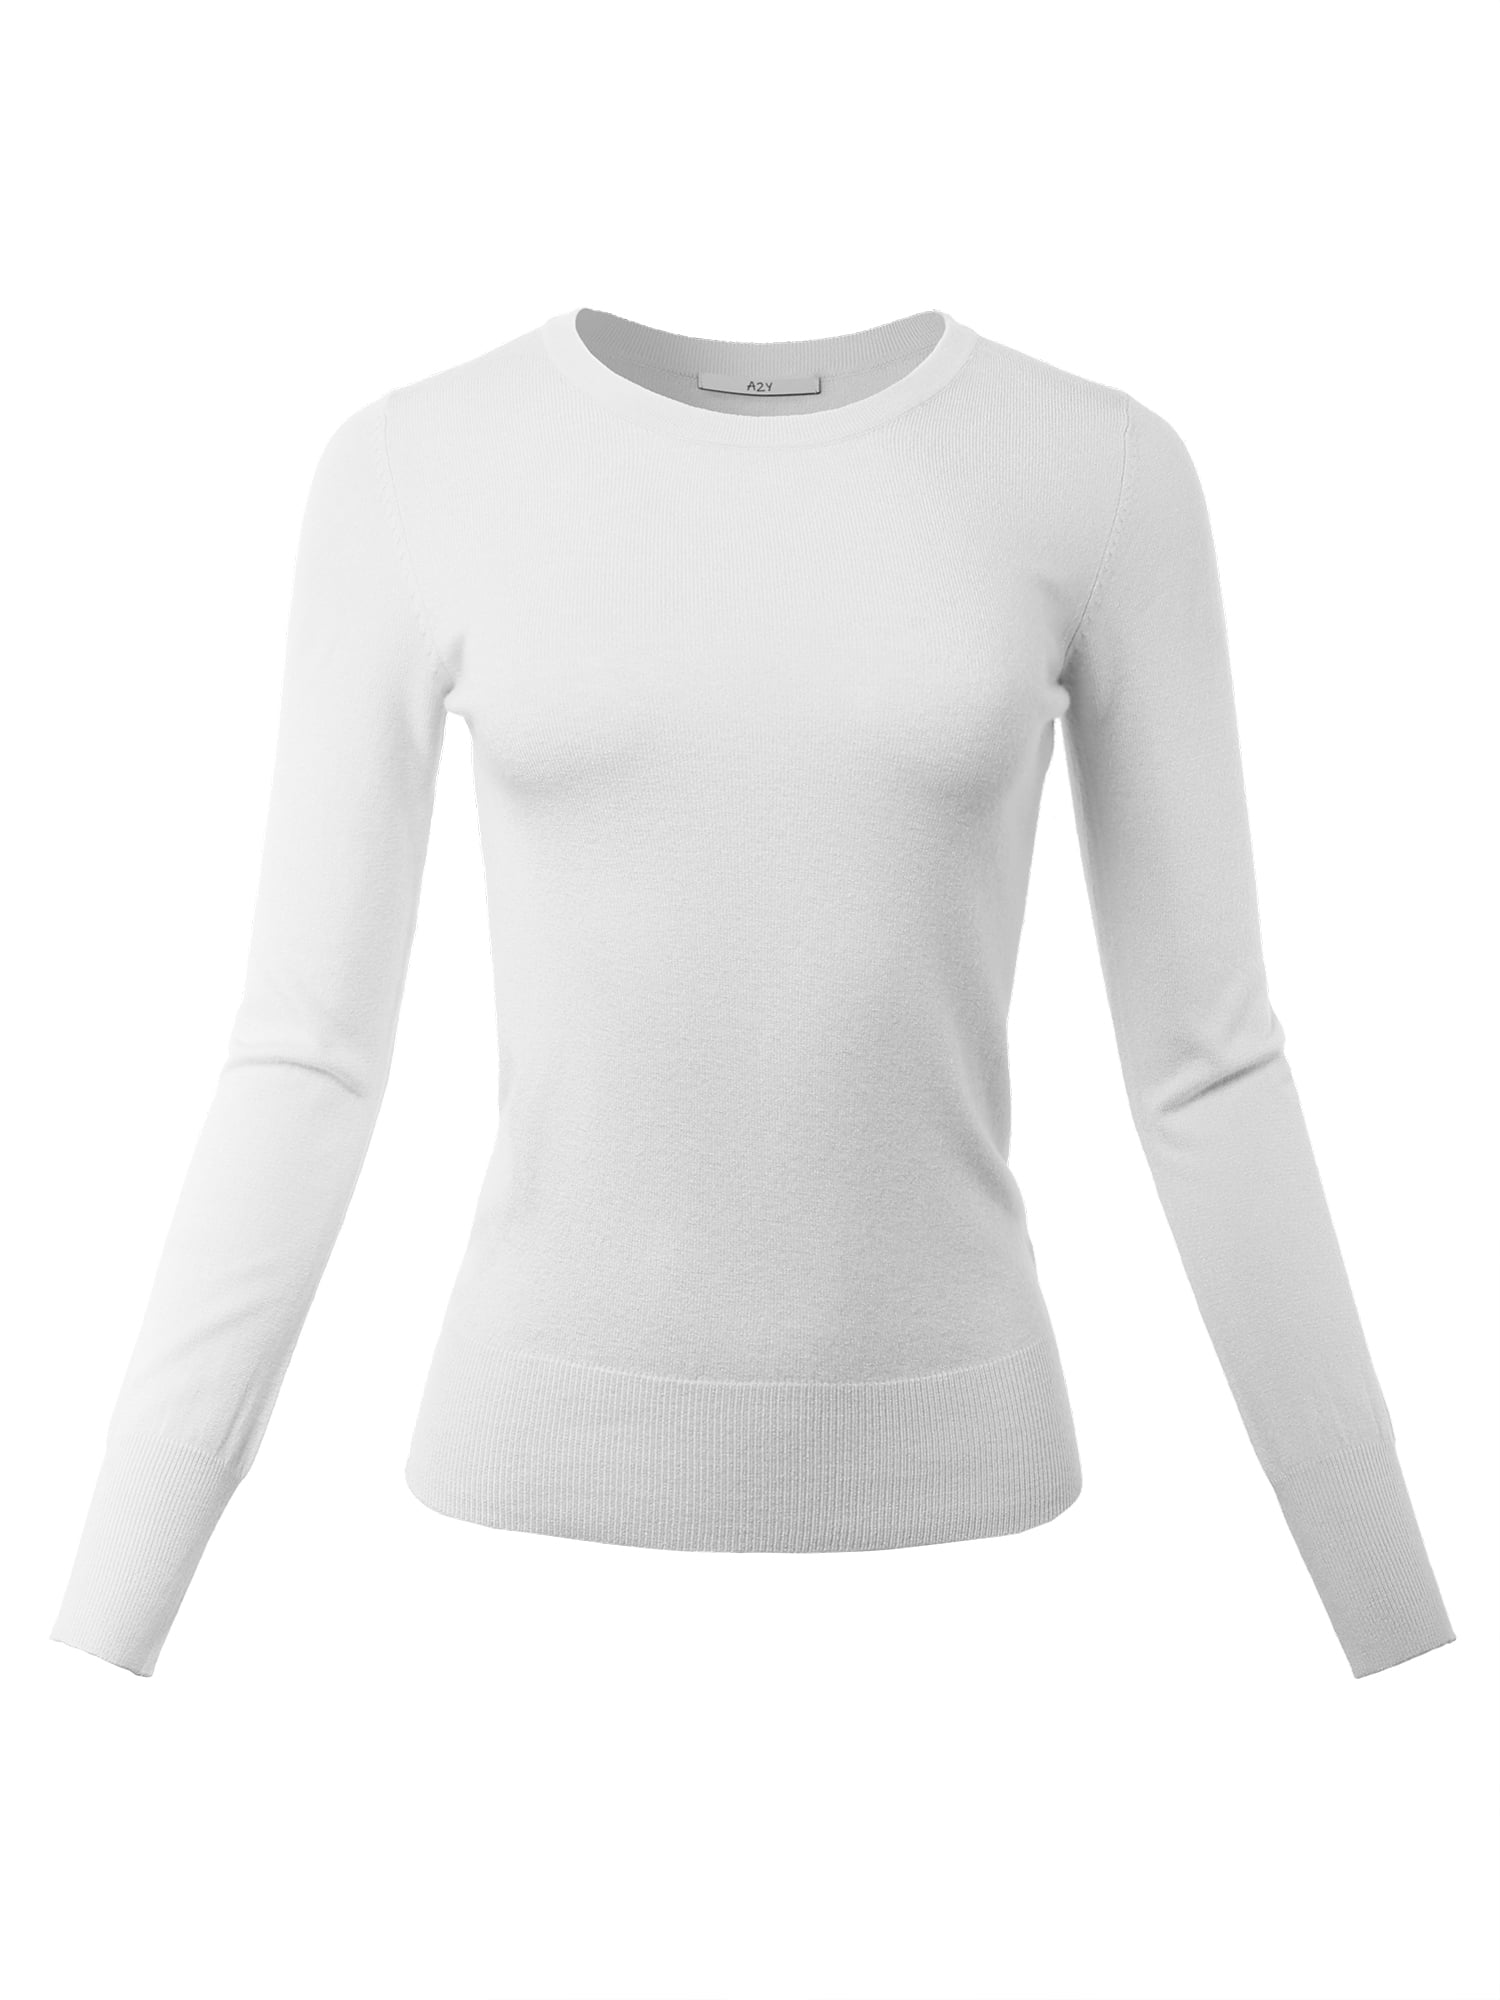 A2Y Women's Fitted Crew Neck Long Sleeve Premium Pullover Viscose ...